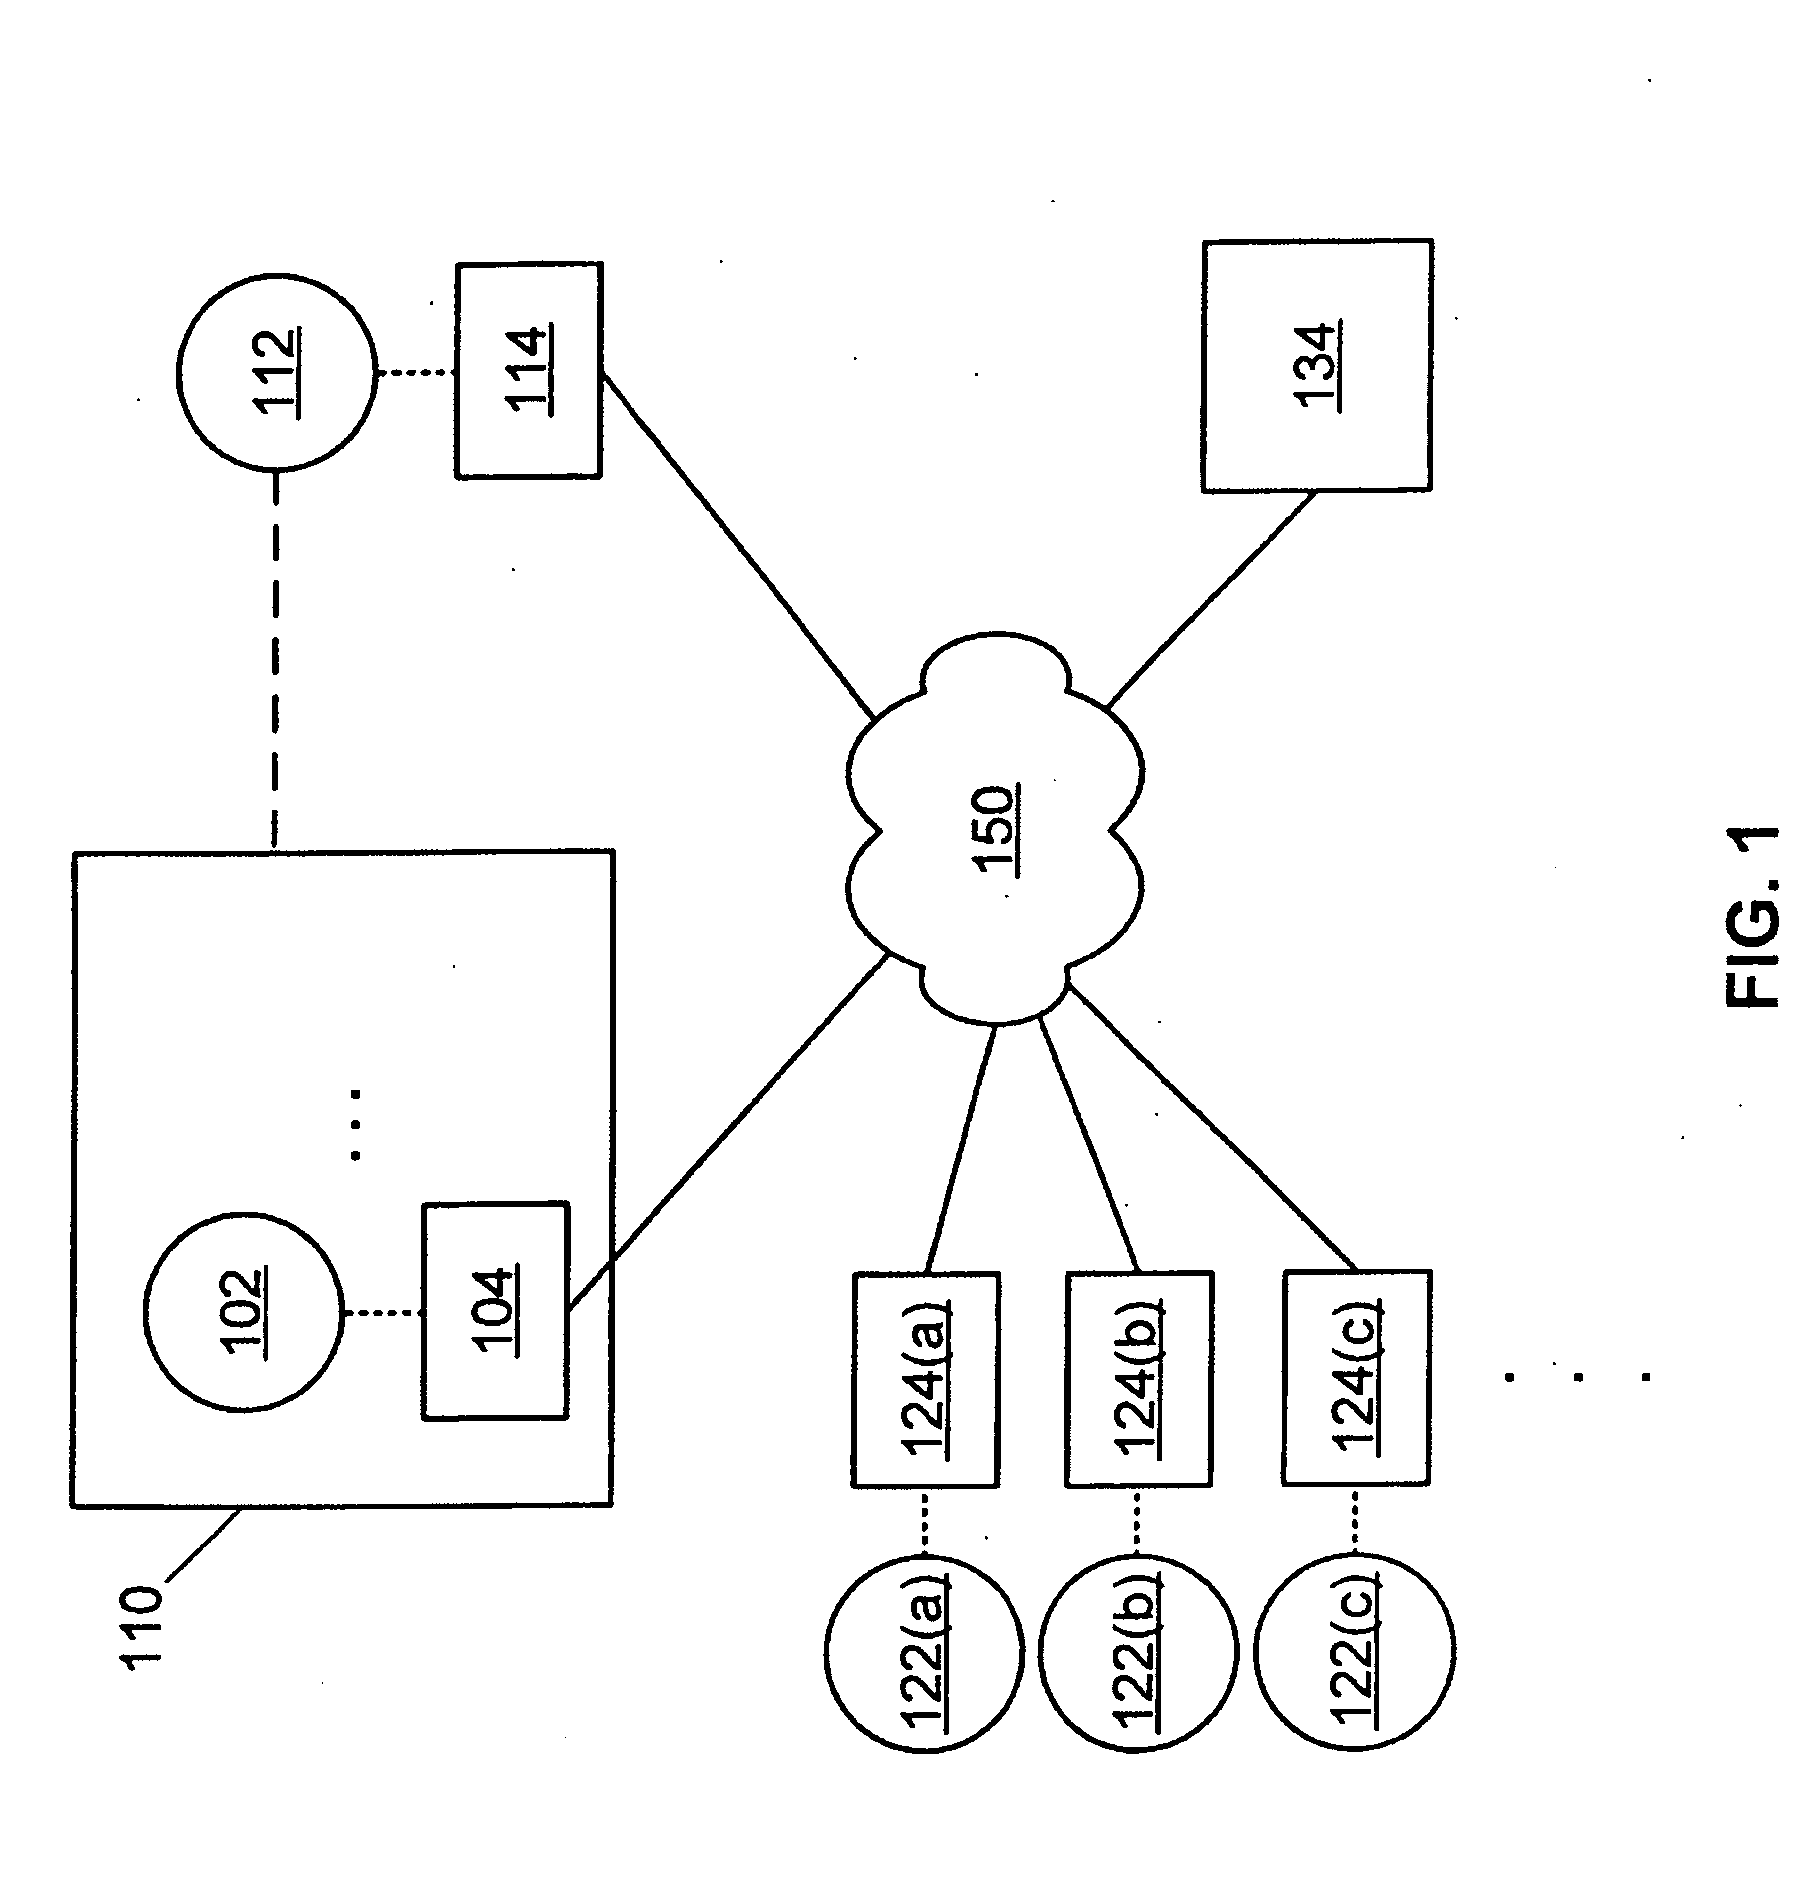 Methods and apparatus for network-based property management